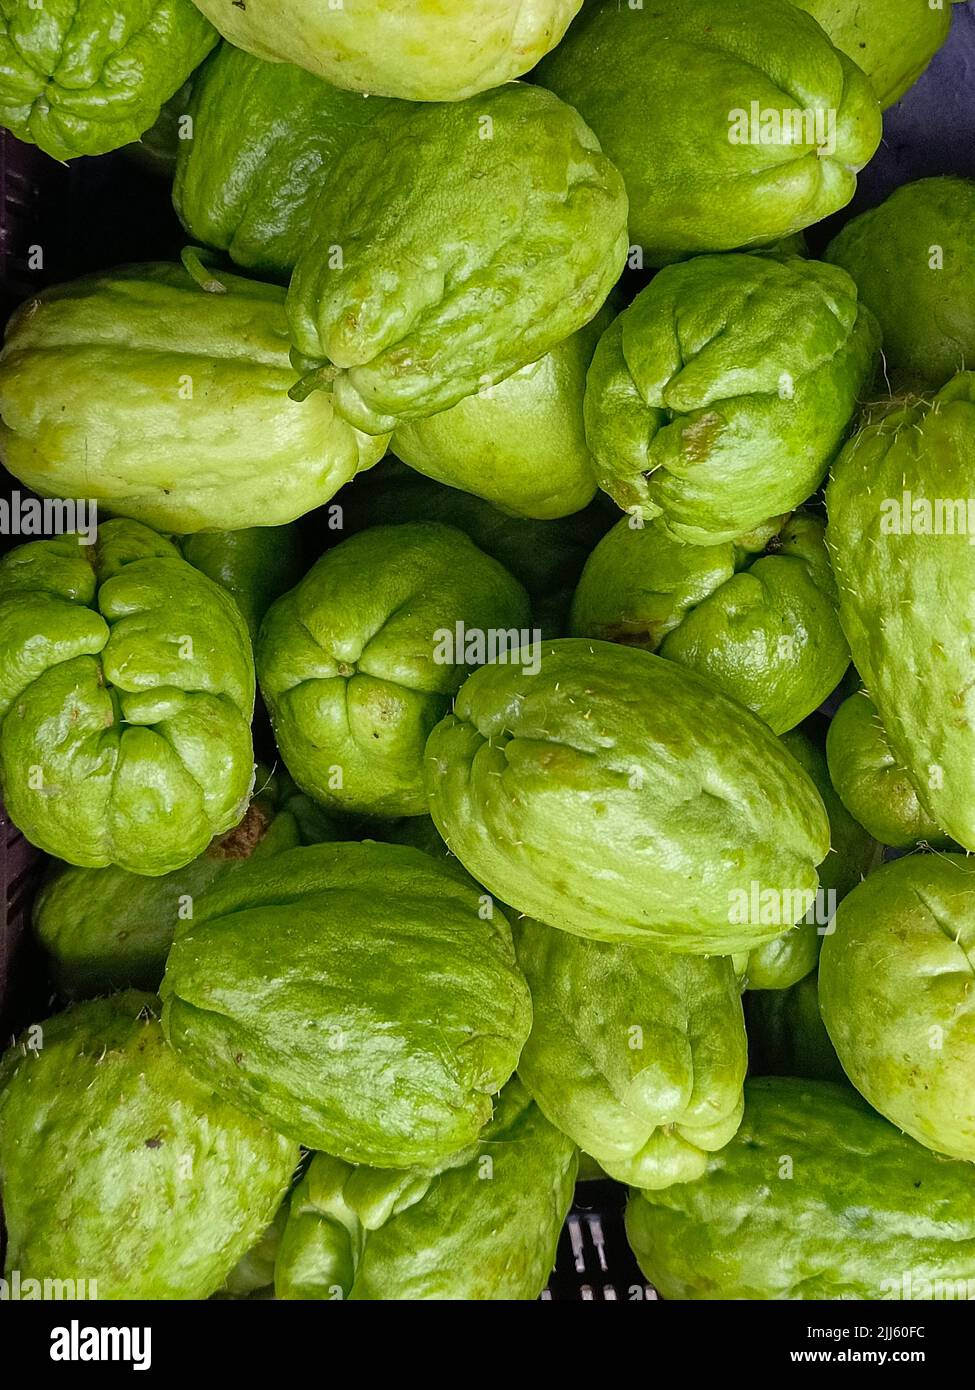 Freah chayote or Sechium edule on market for sale, Fresh Green Vegetable. Background Stock Photo